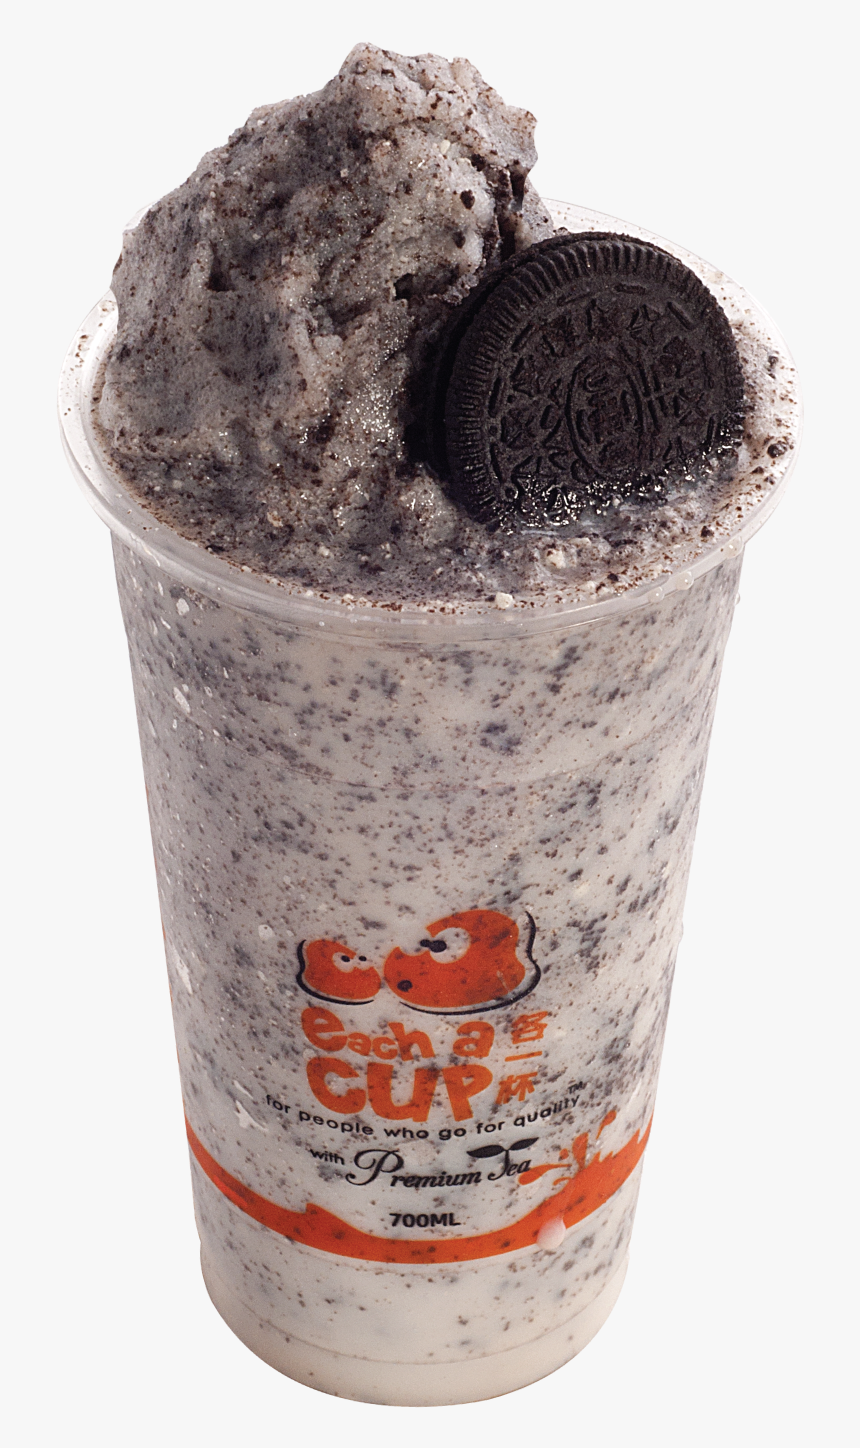 Each A Cup Oreo, HD Png Download, Free Download